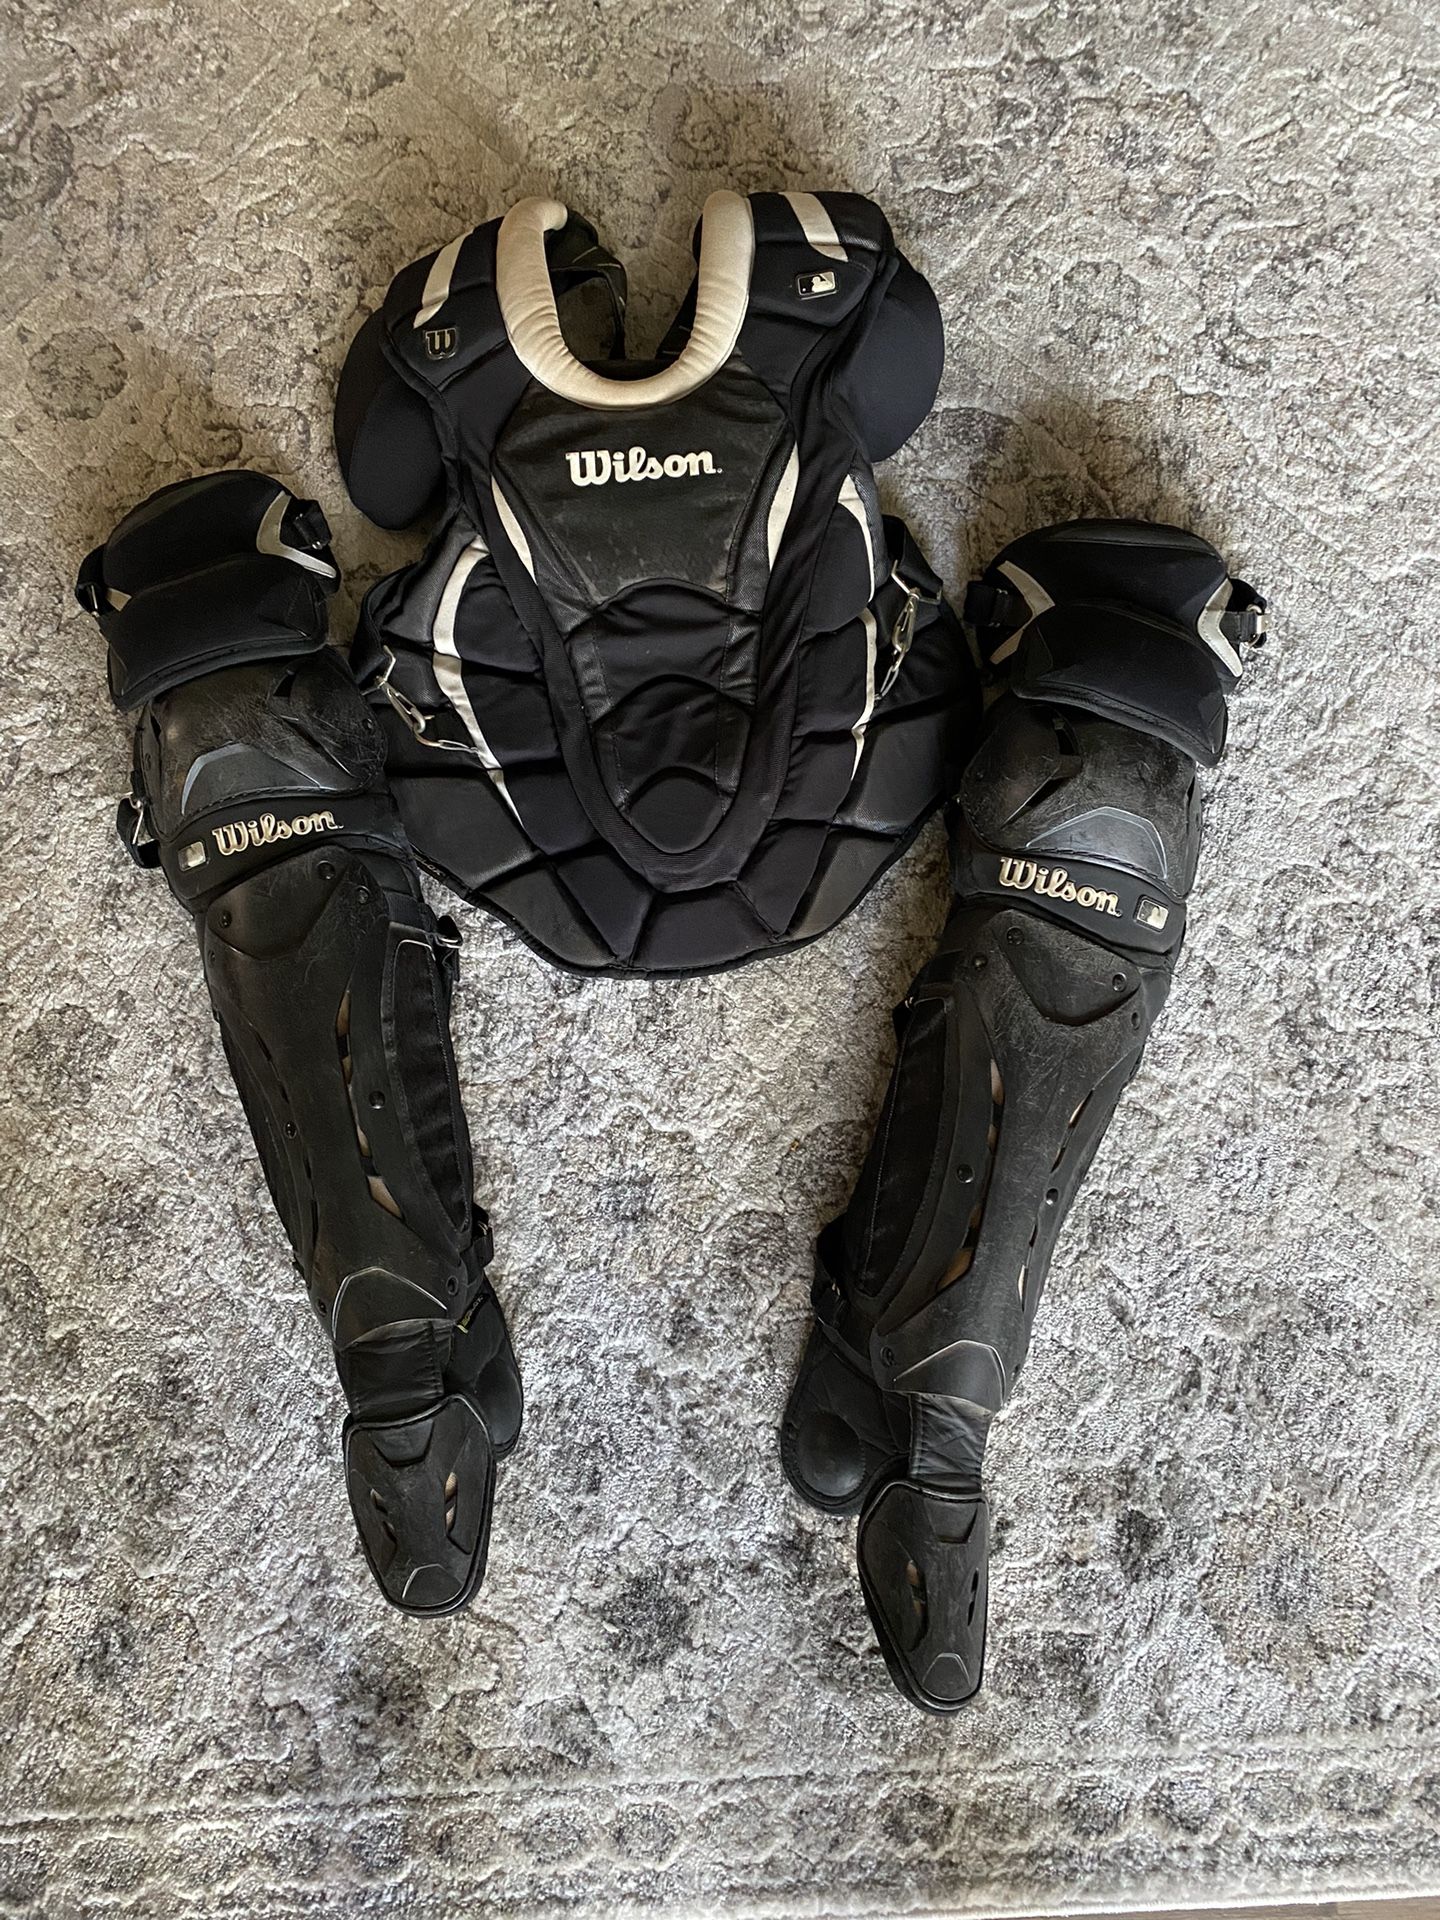 Wilson Adult Baseball Catchers Gear Used for Sale in Aliso Viejo